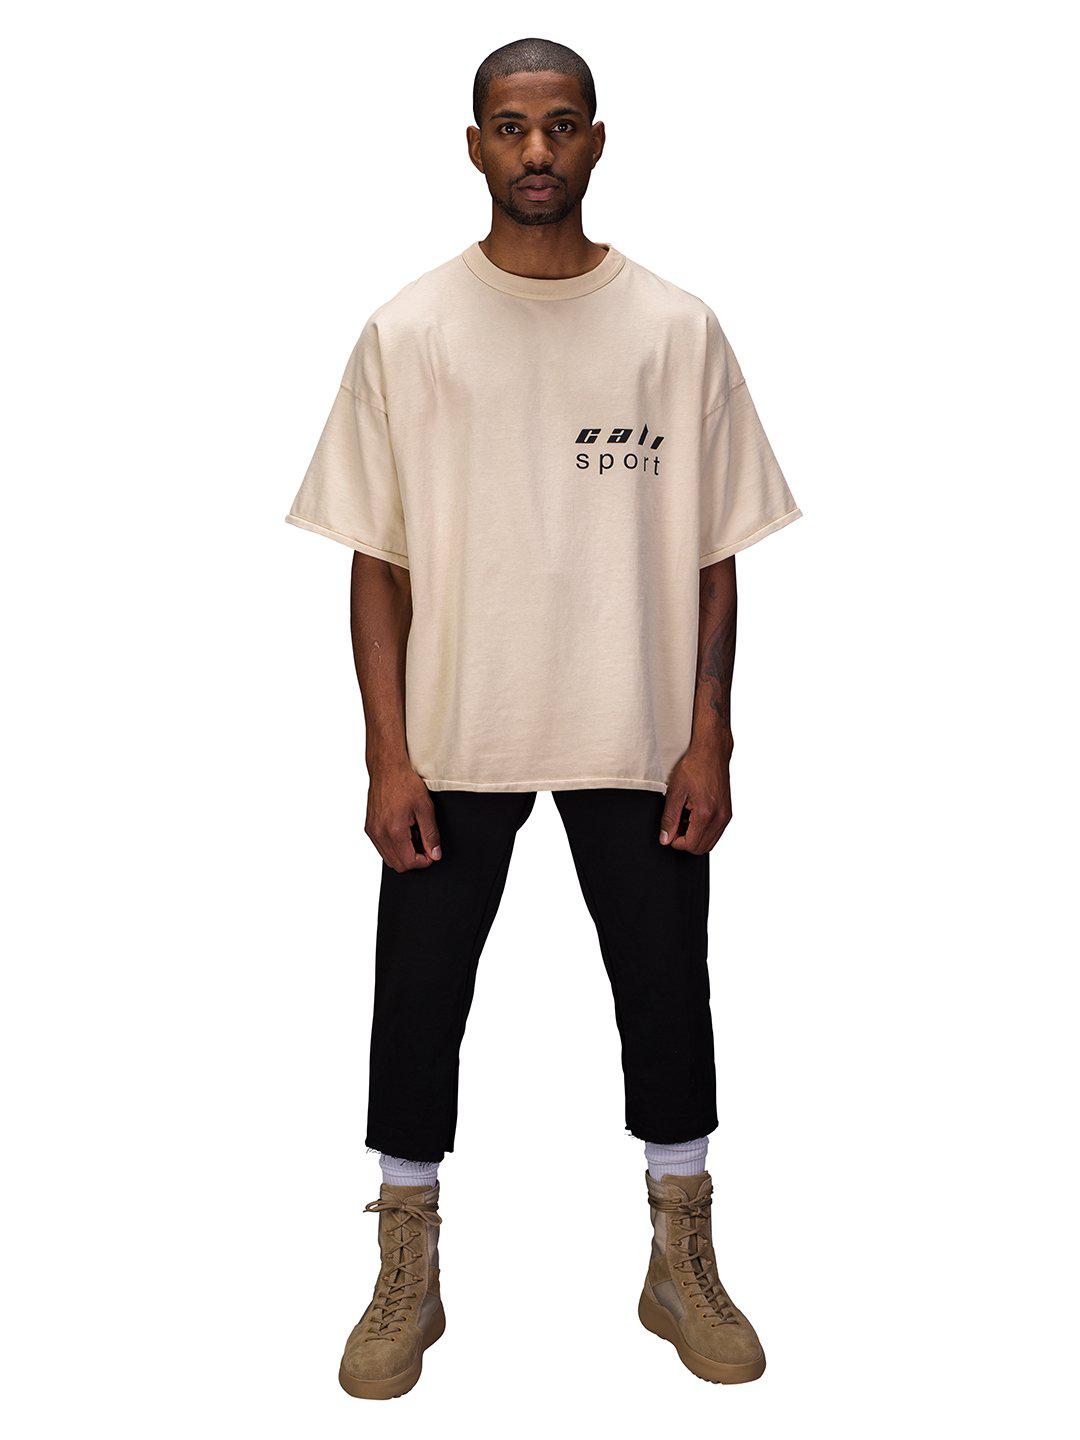 Yeezy Cotton 'cali Sport' Oversized T-shirt in Natural for Men | Lyst